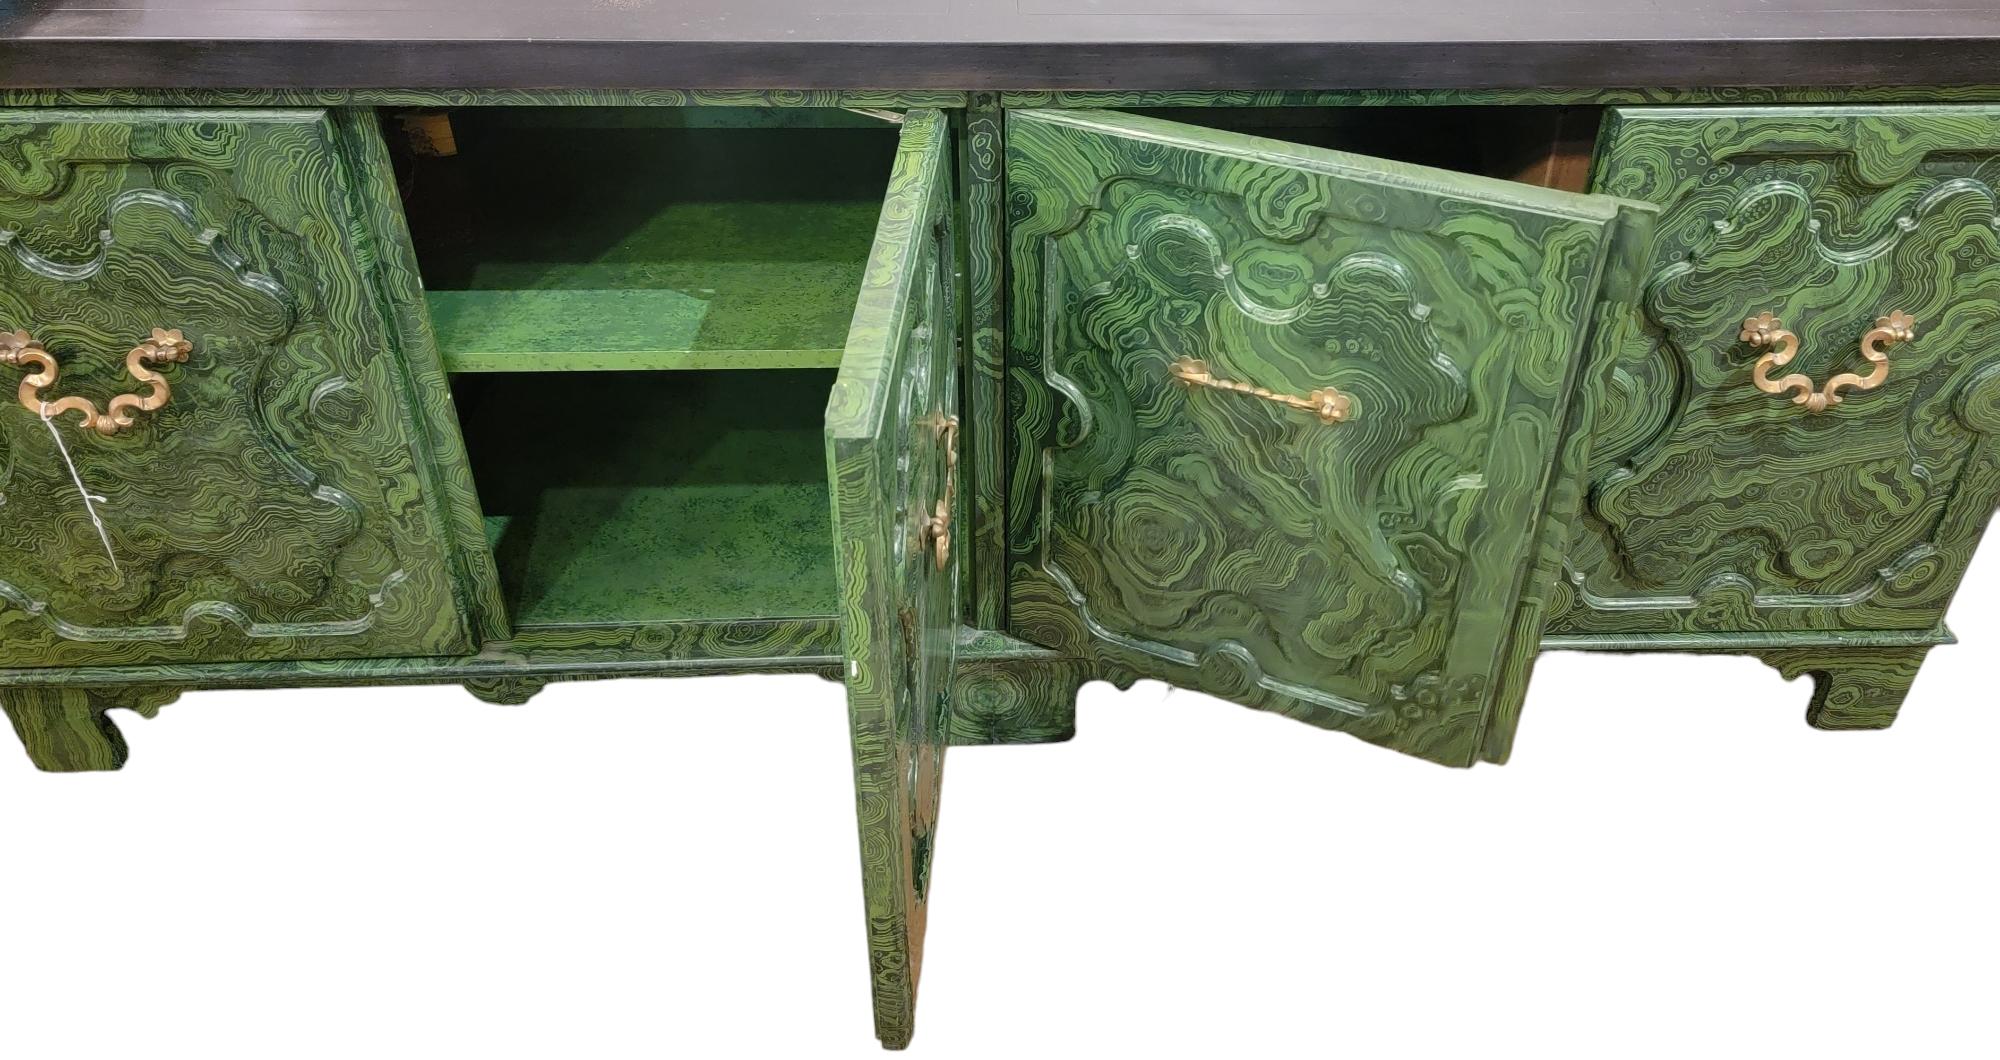 Hand Painted Baker 4 Door Credenza With Ornate Brass Handles by Tony Duquette For Sale 2